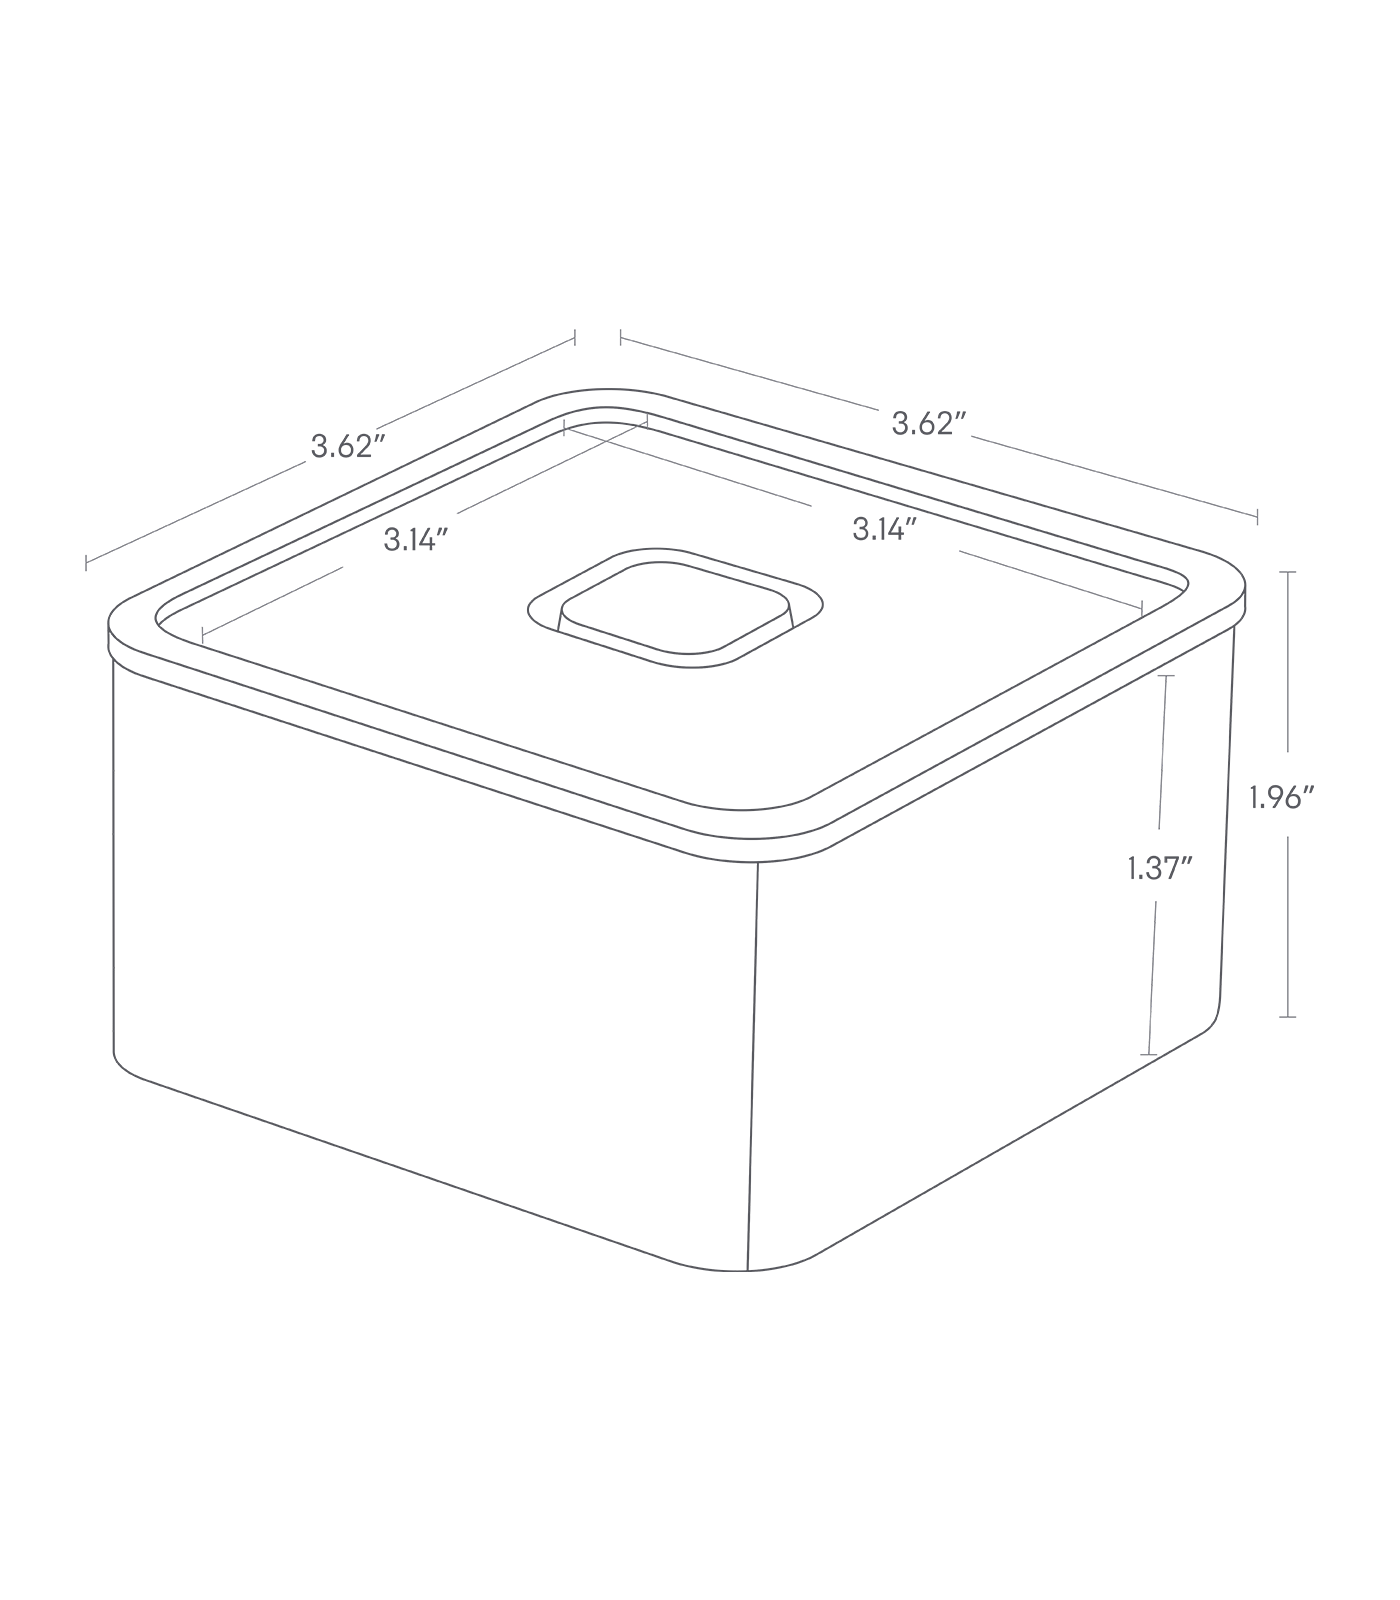 Dimension image for Vacuum-Sealing Bento Box - Square showing a total length/width of 3.62